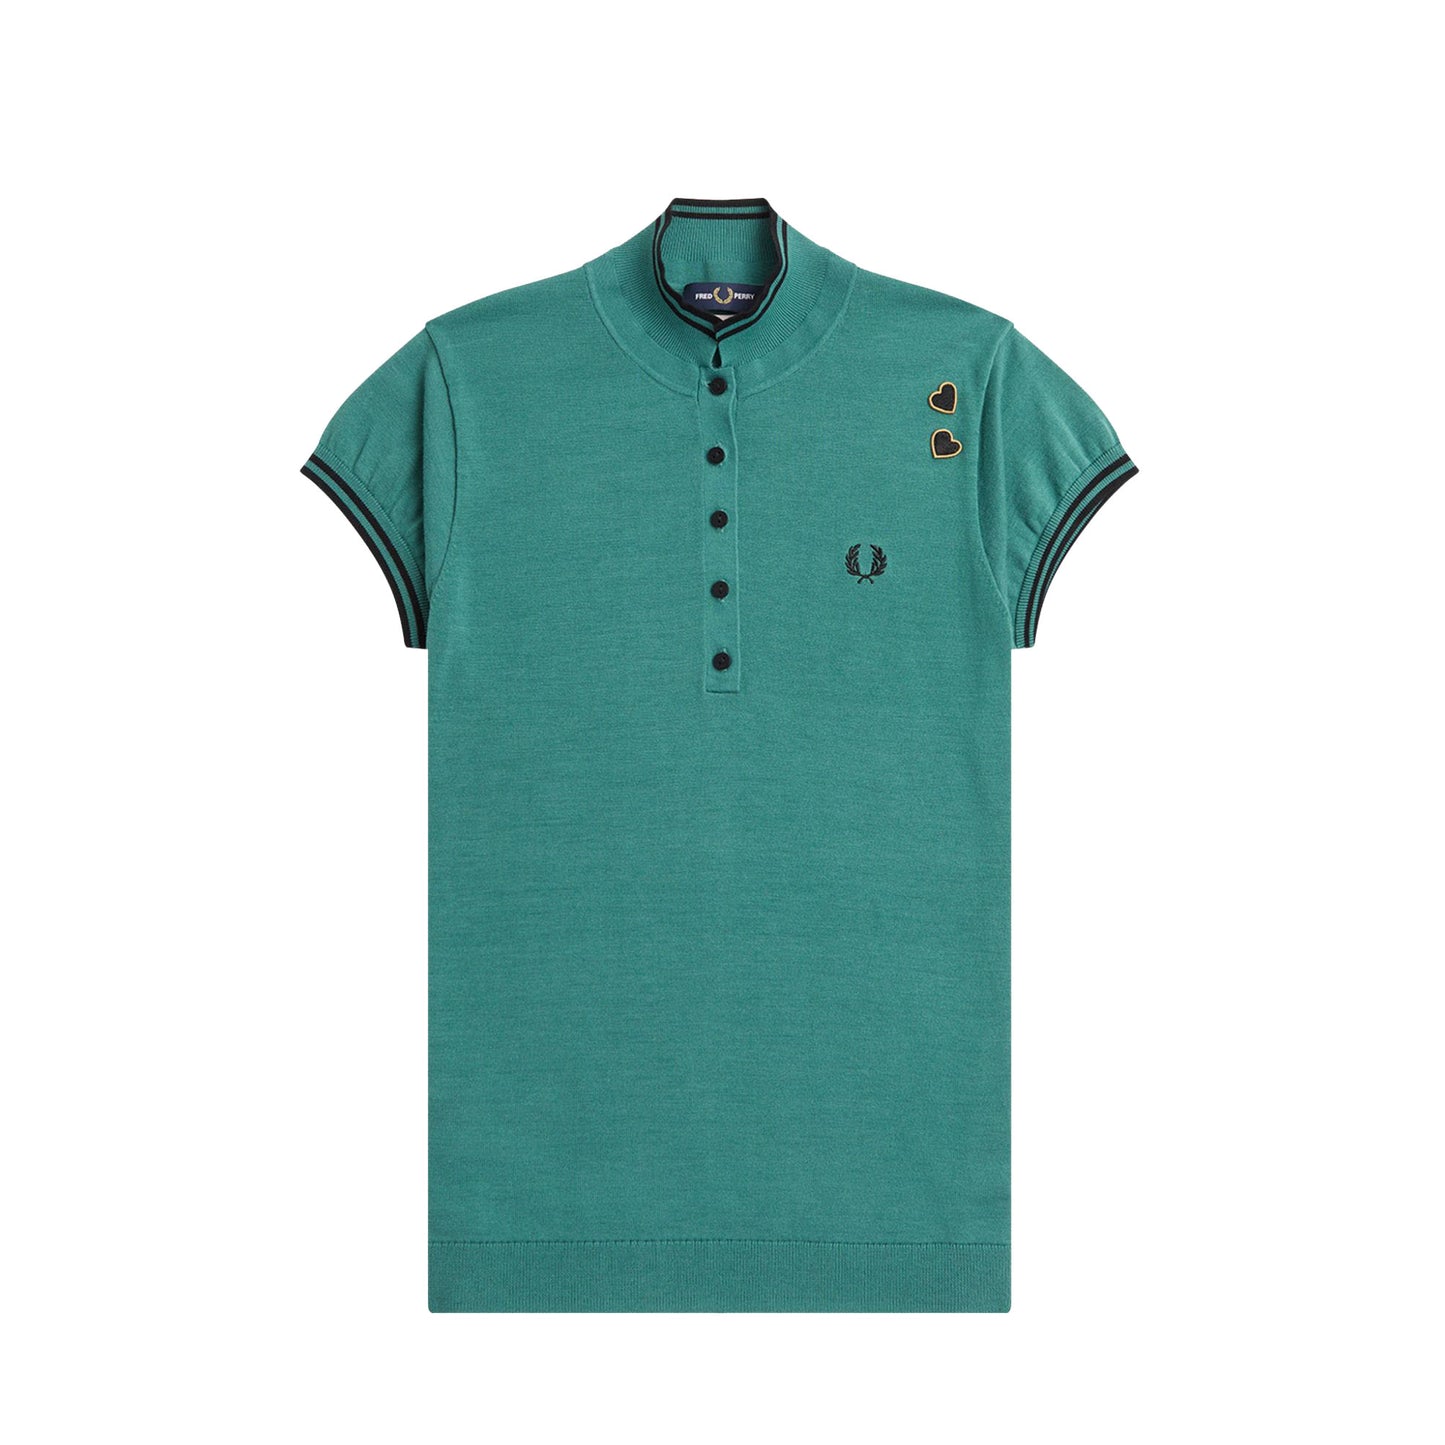 Fred Perry AMY WINEHOUSE FOUNDATION Knitted Shirt